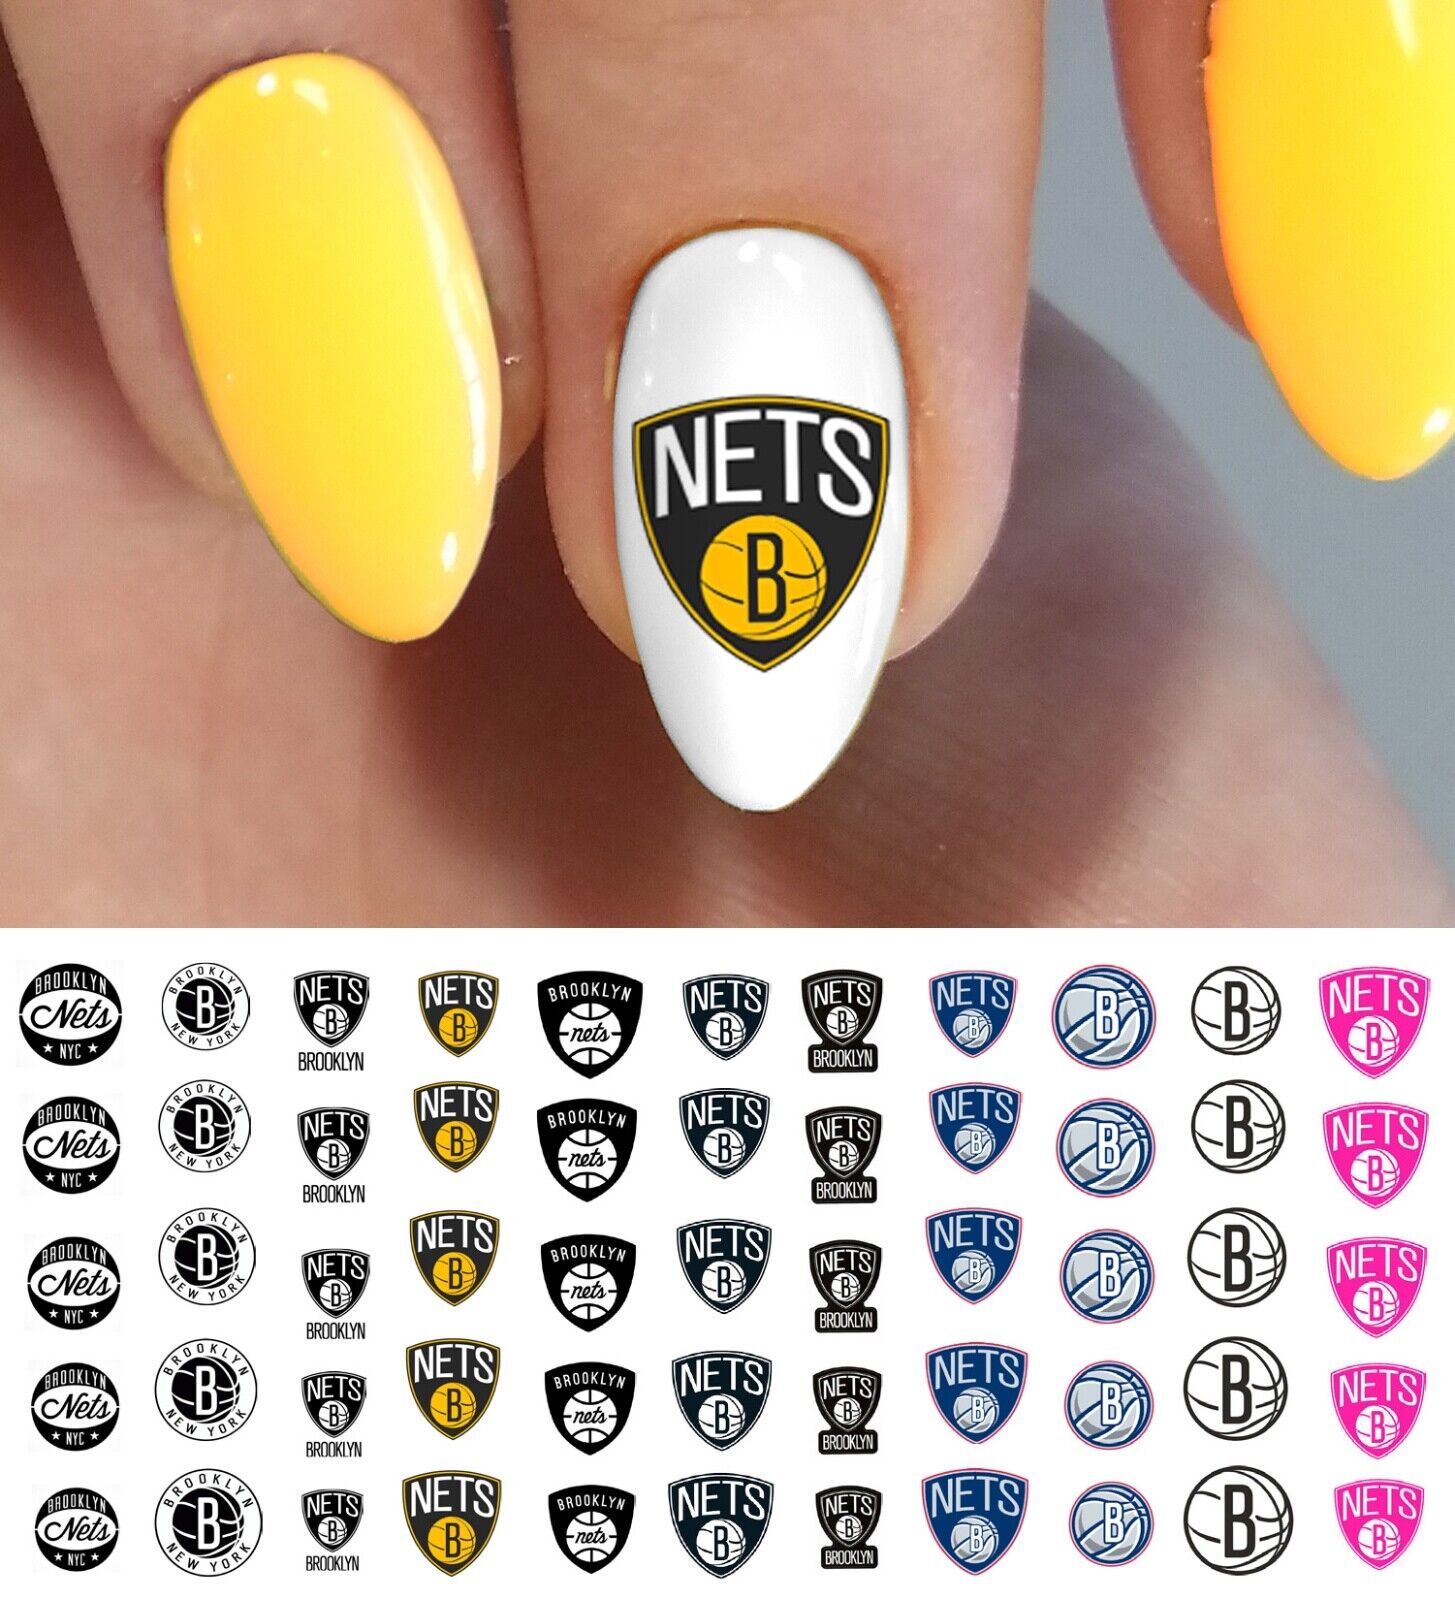 Woody Allen Nail Art is an Awesome Thing – Vol. 1 Brooklyn